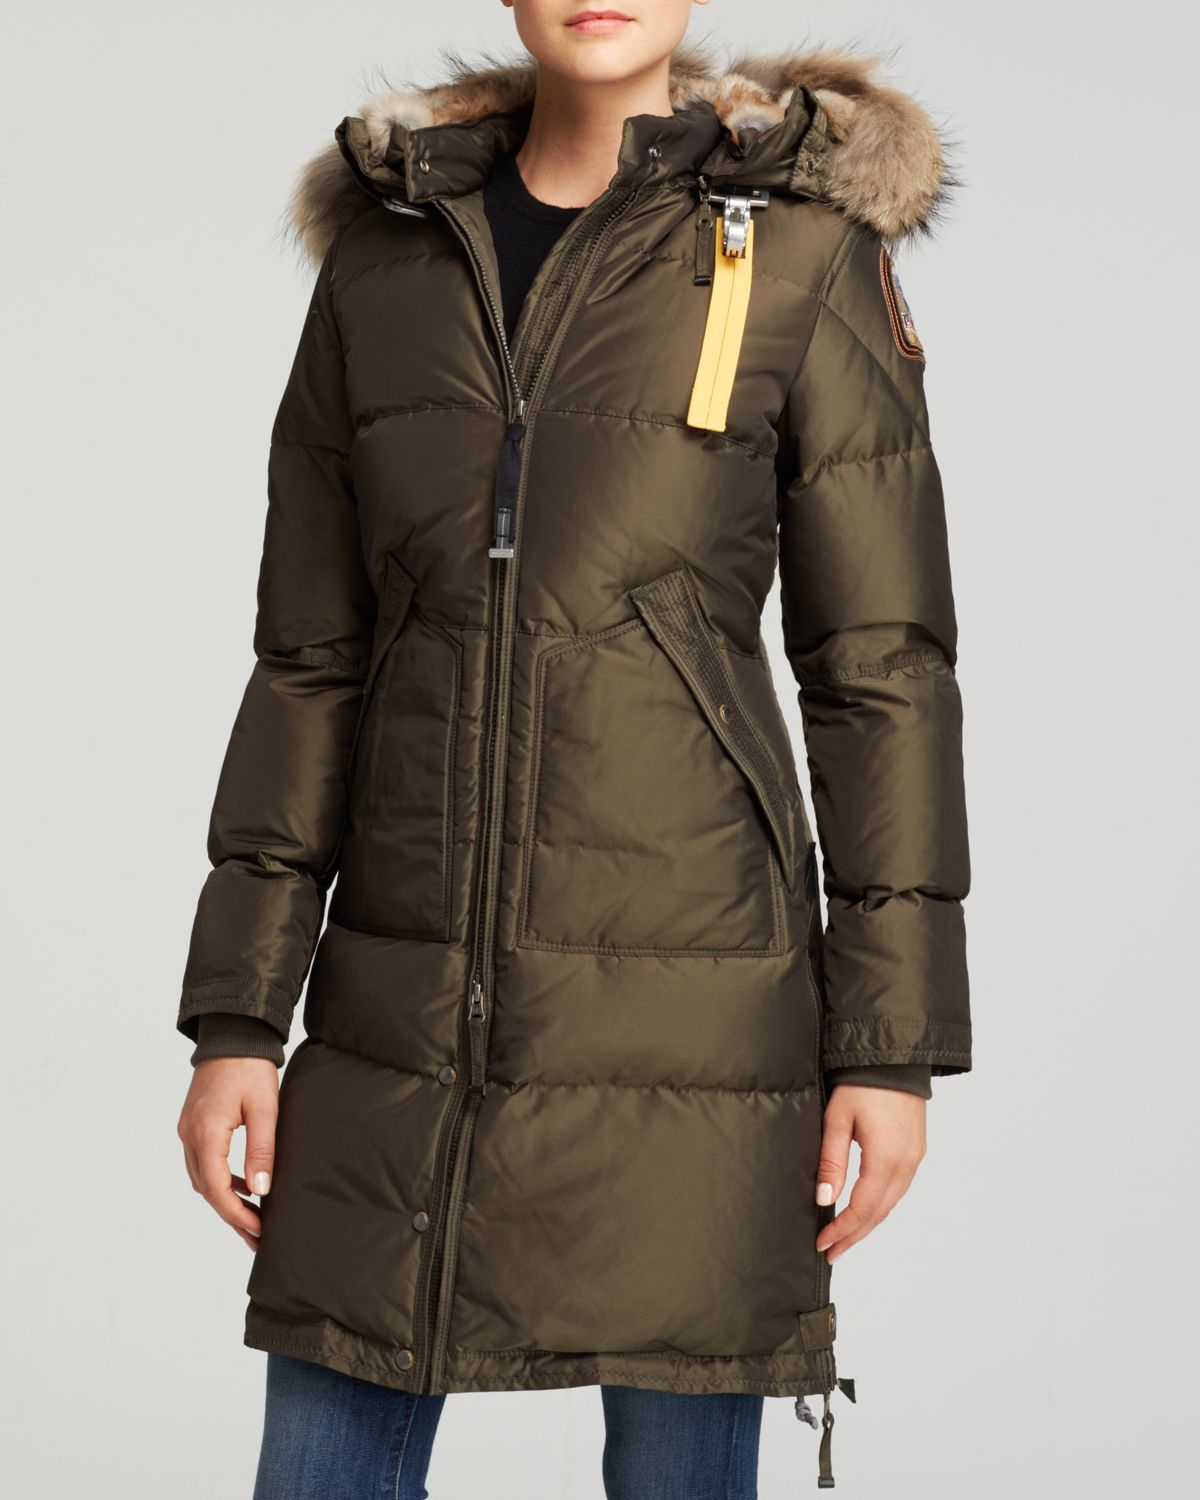 Parajumpers Long Bear Coat in Olive (Green) - Lyst